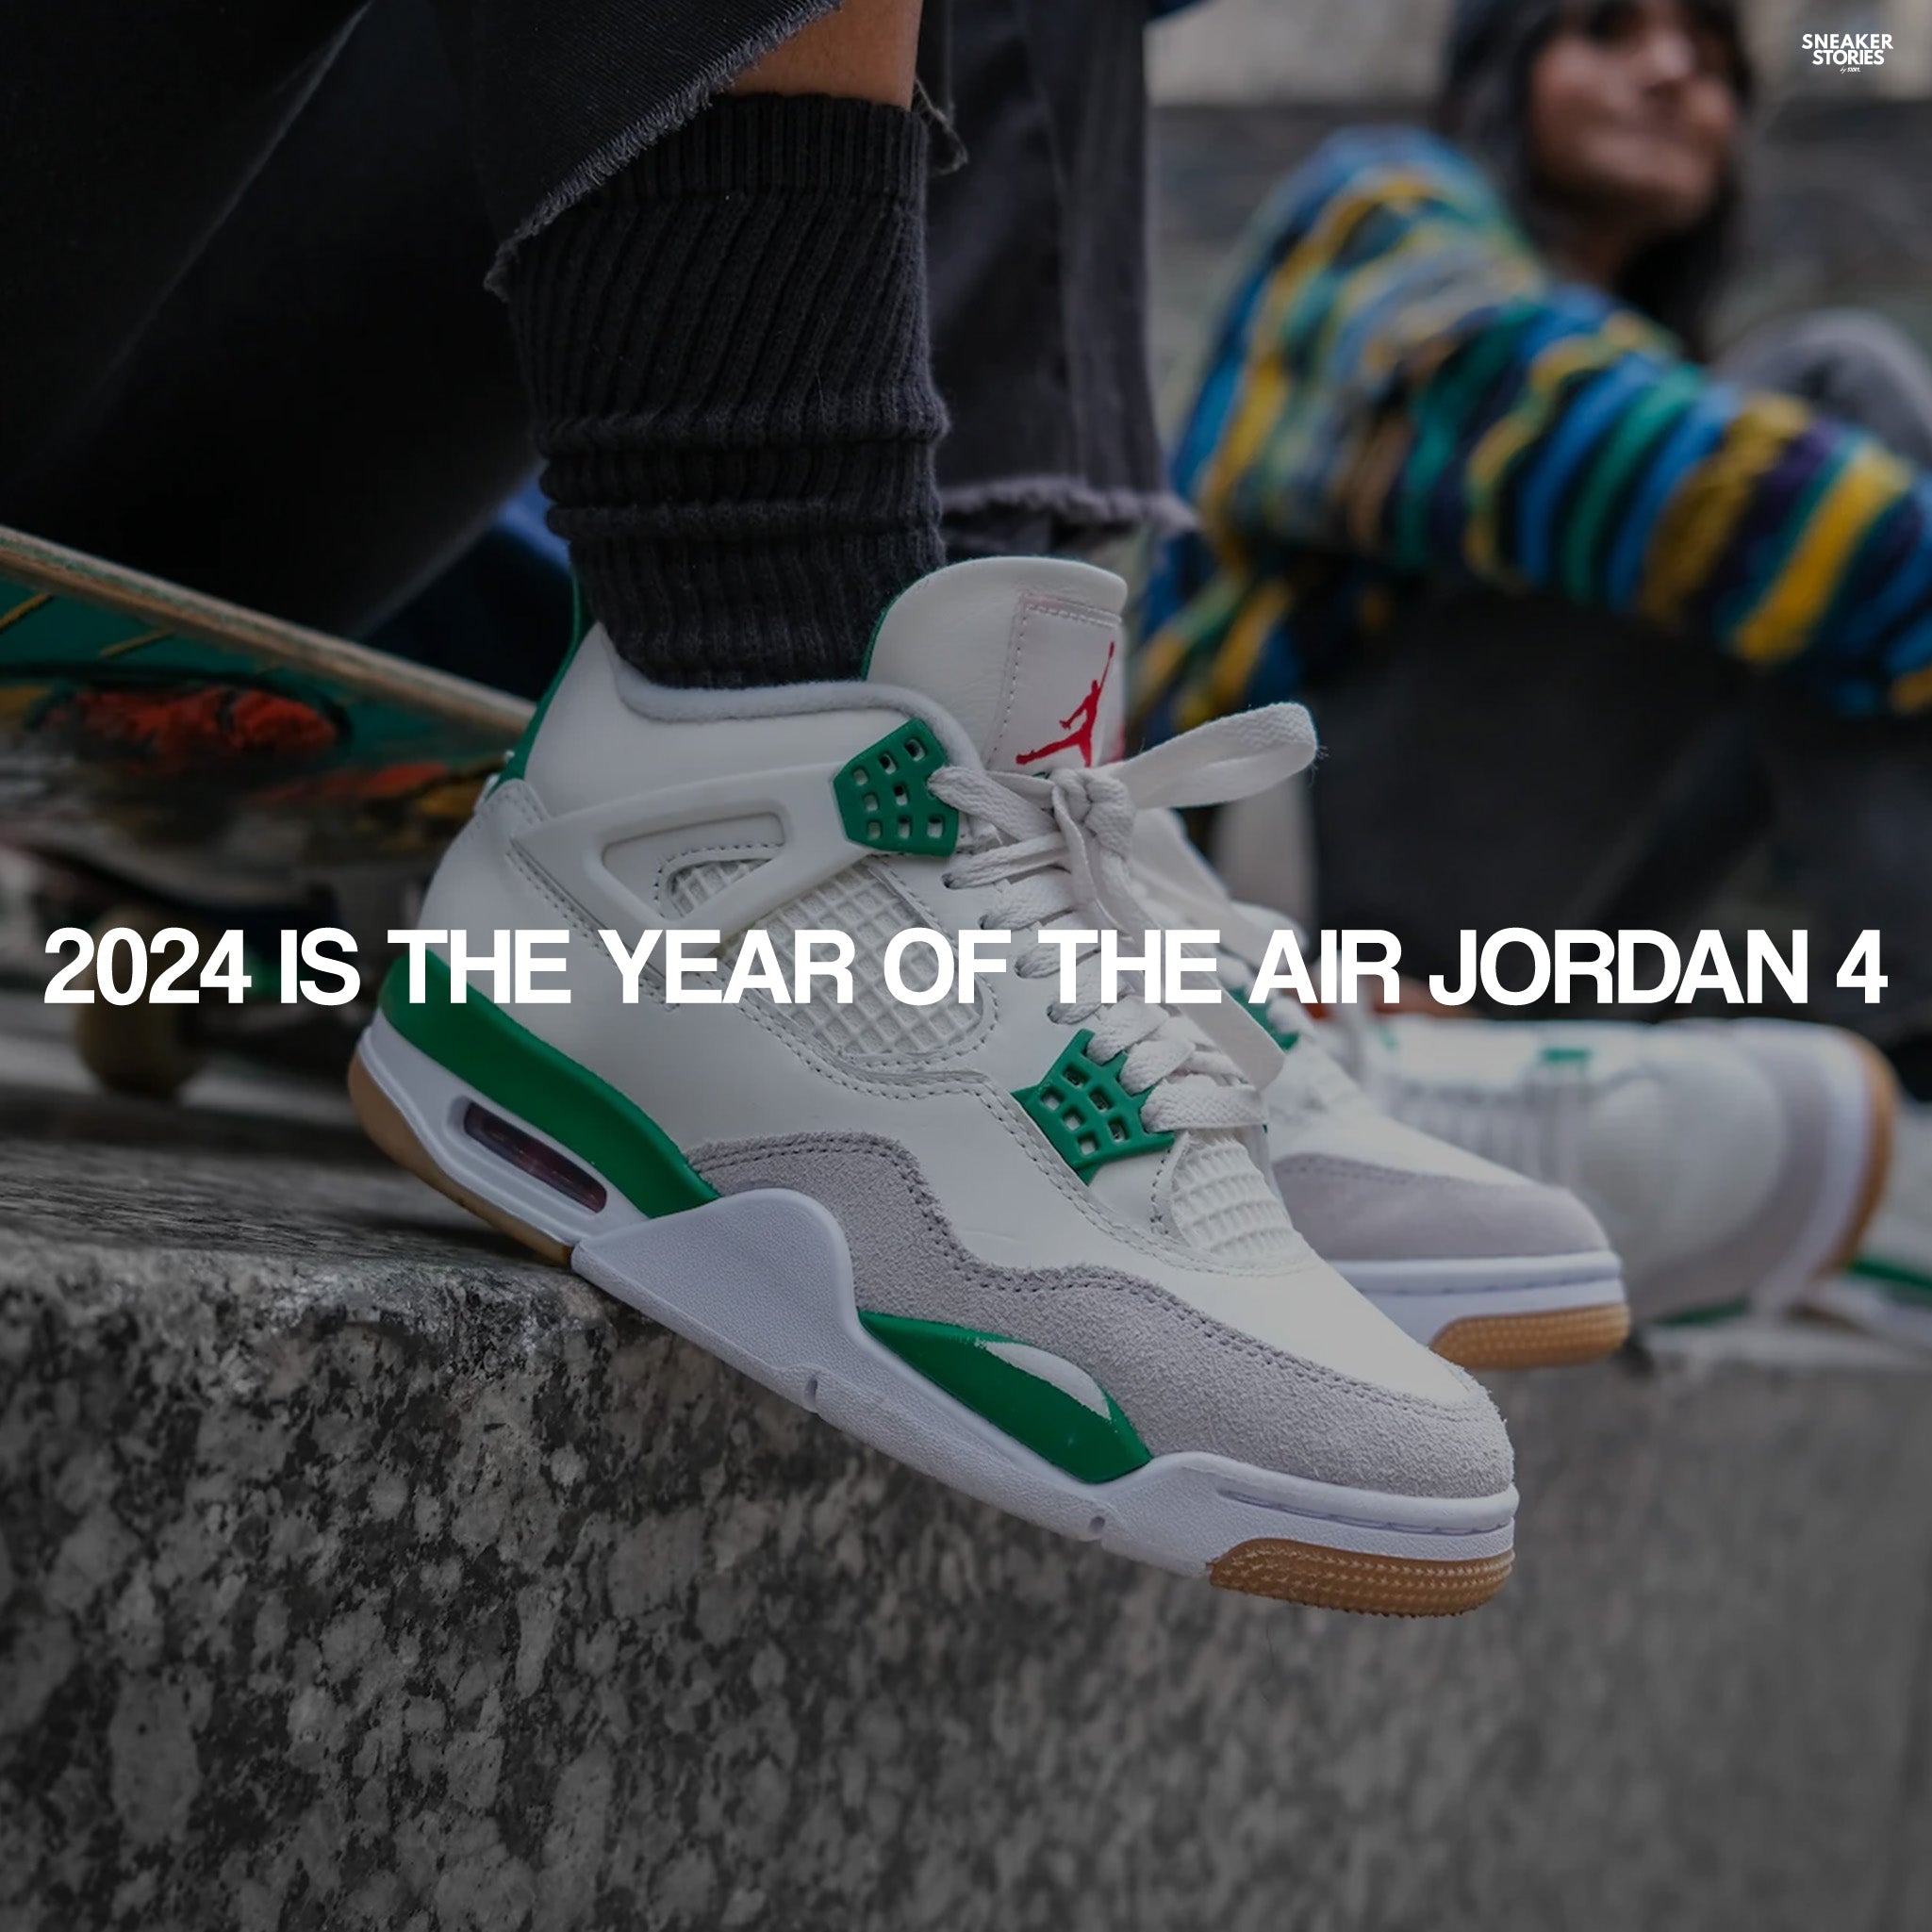 2024 is the year of the Air Jordan 4